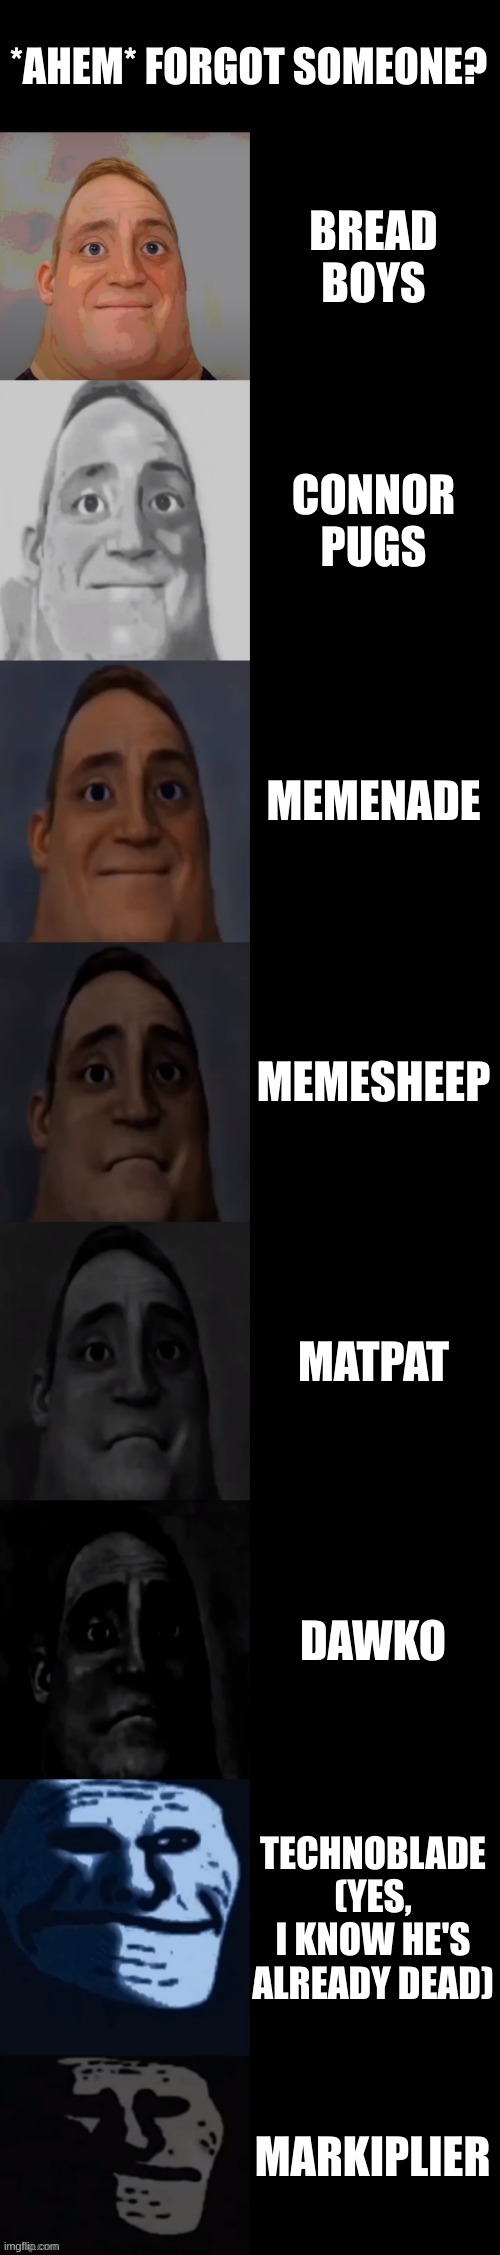 Mr Incredible becoming sad | *AHEM* FORGOT SOMEONE? BREAD BOYS CONNOR PUGS MEMENADE MEMESHEEP MATPAT DAWKO TECHNOBLADE
(YES, I KNOW HE'S ALREADY DEAD) MARKIPLIER | image tagged in mr incredible becoming sad | made w/ Imgflip meme maker